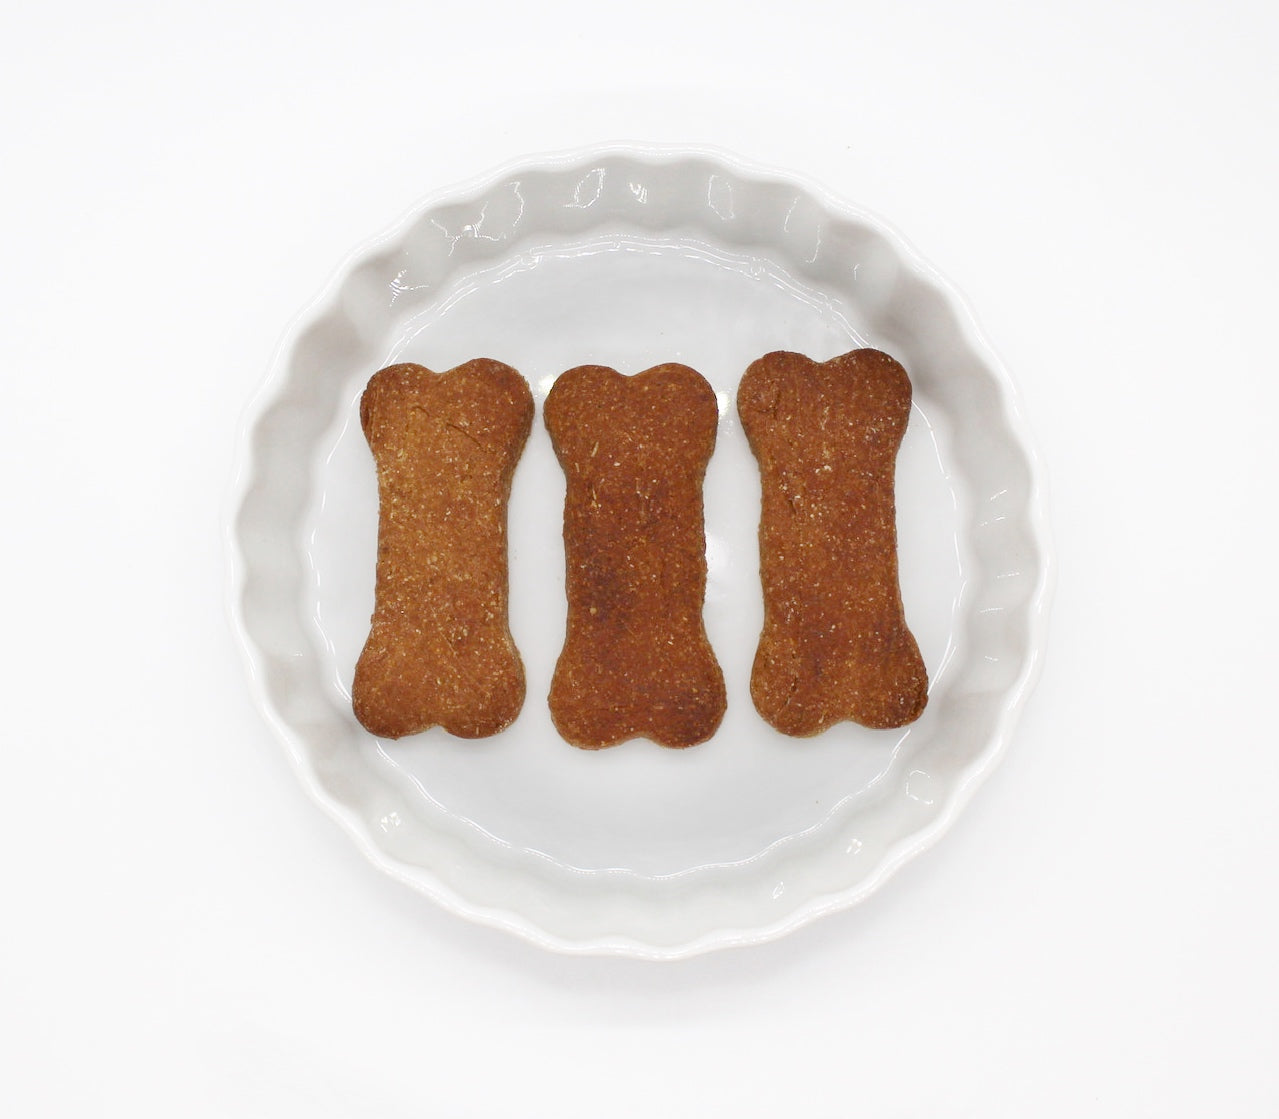 Three bone shaped tasty peanut butter and banana flavor dog biscuits displayed in a round, white dish.